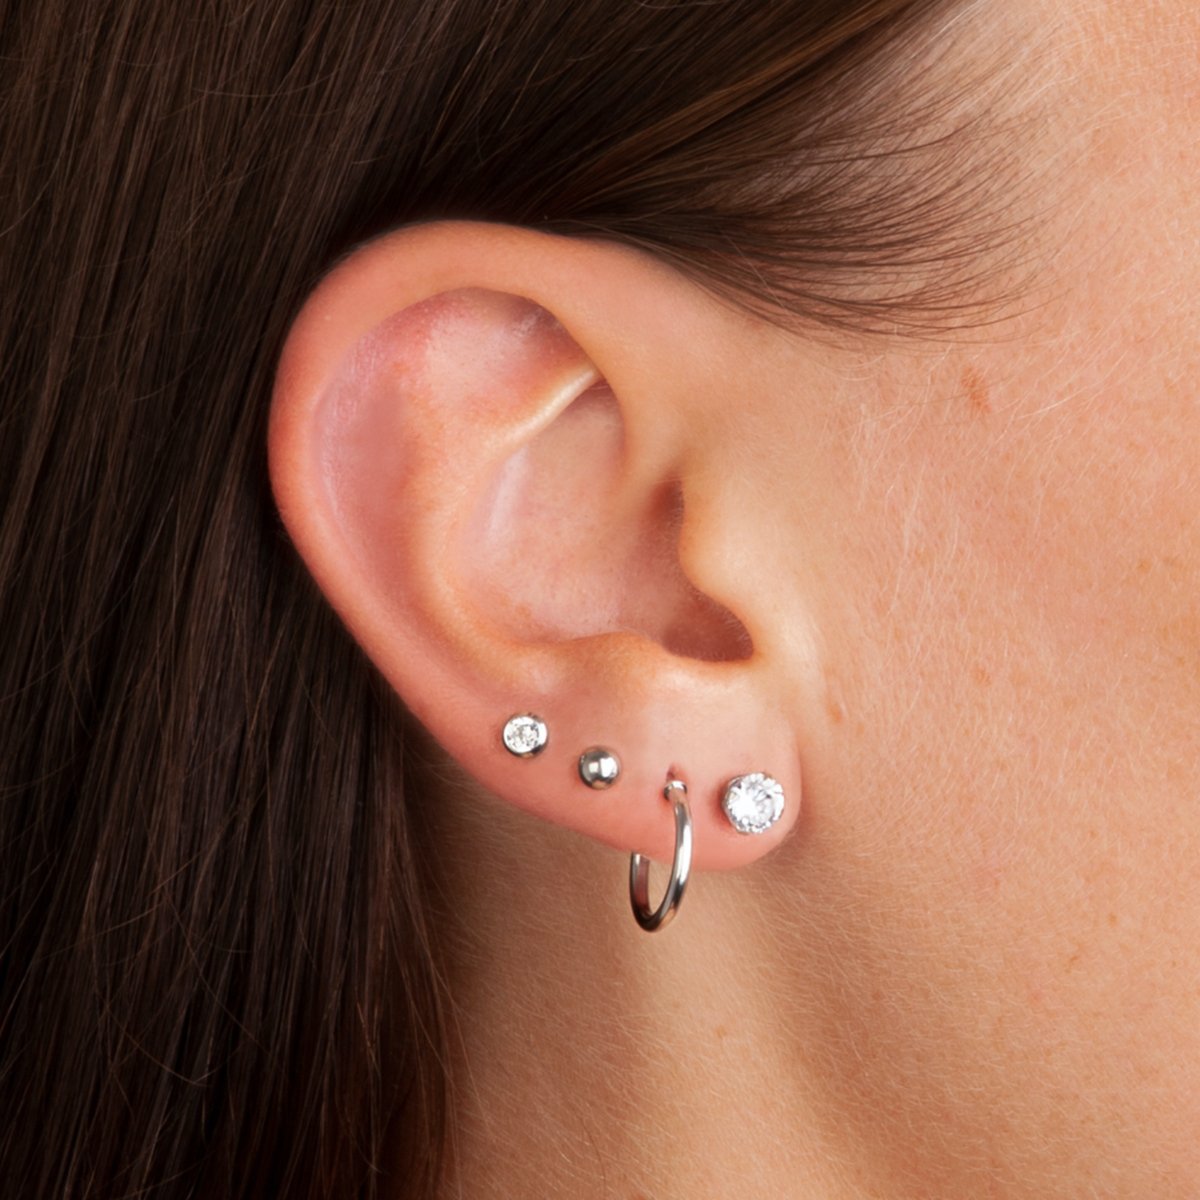 Is Piercings While Pregnant Safe?